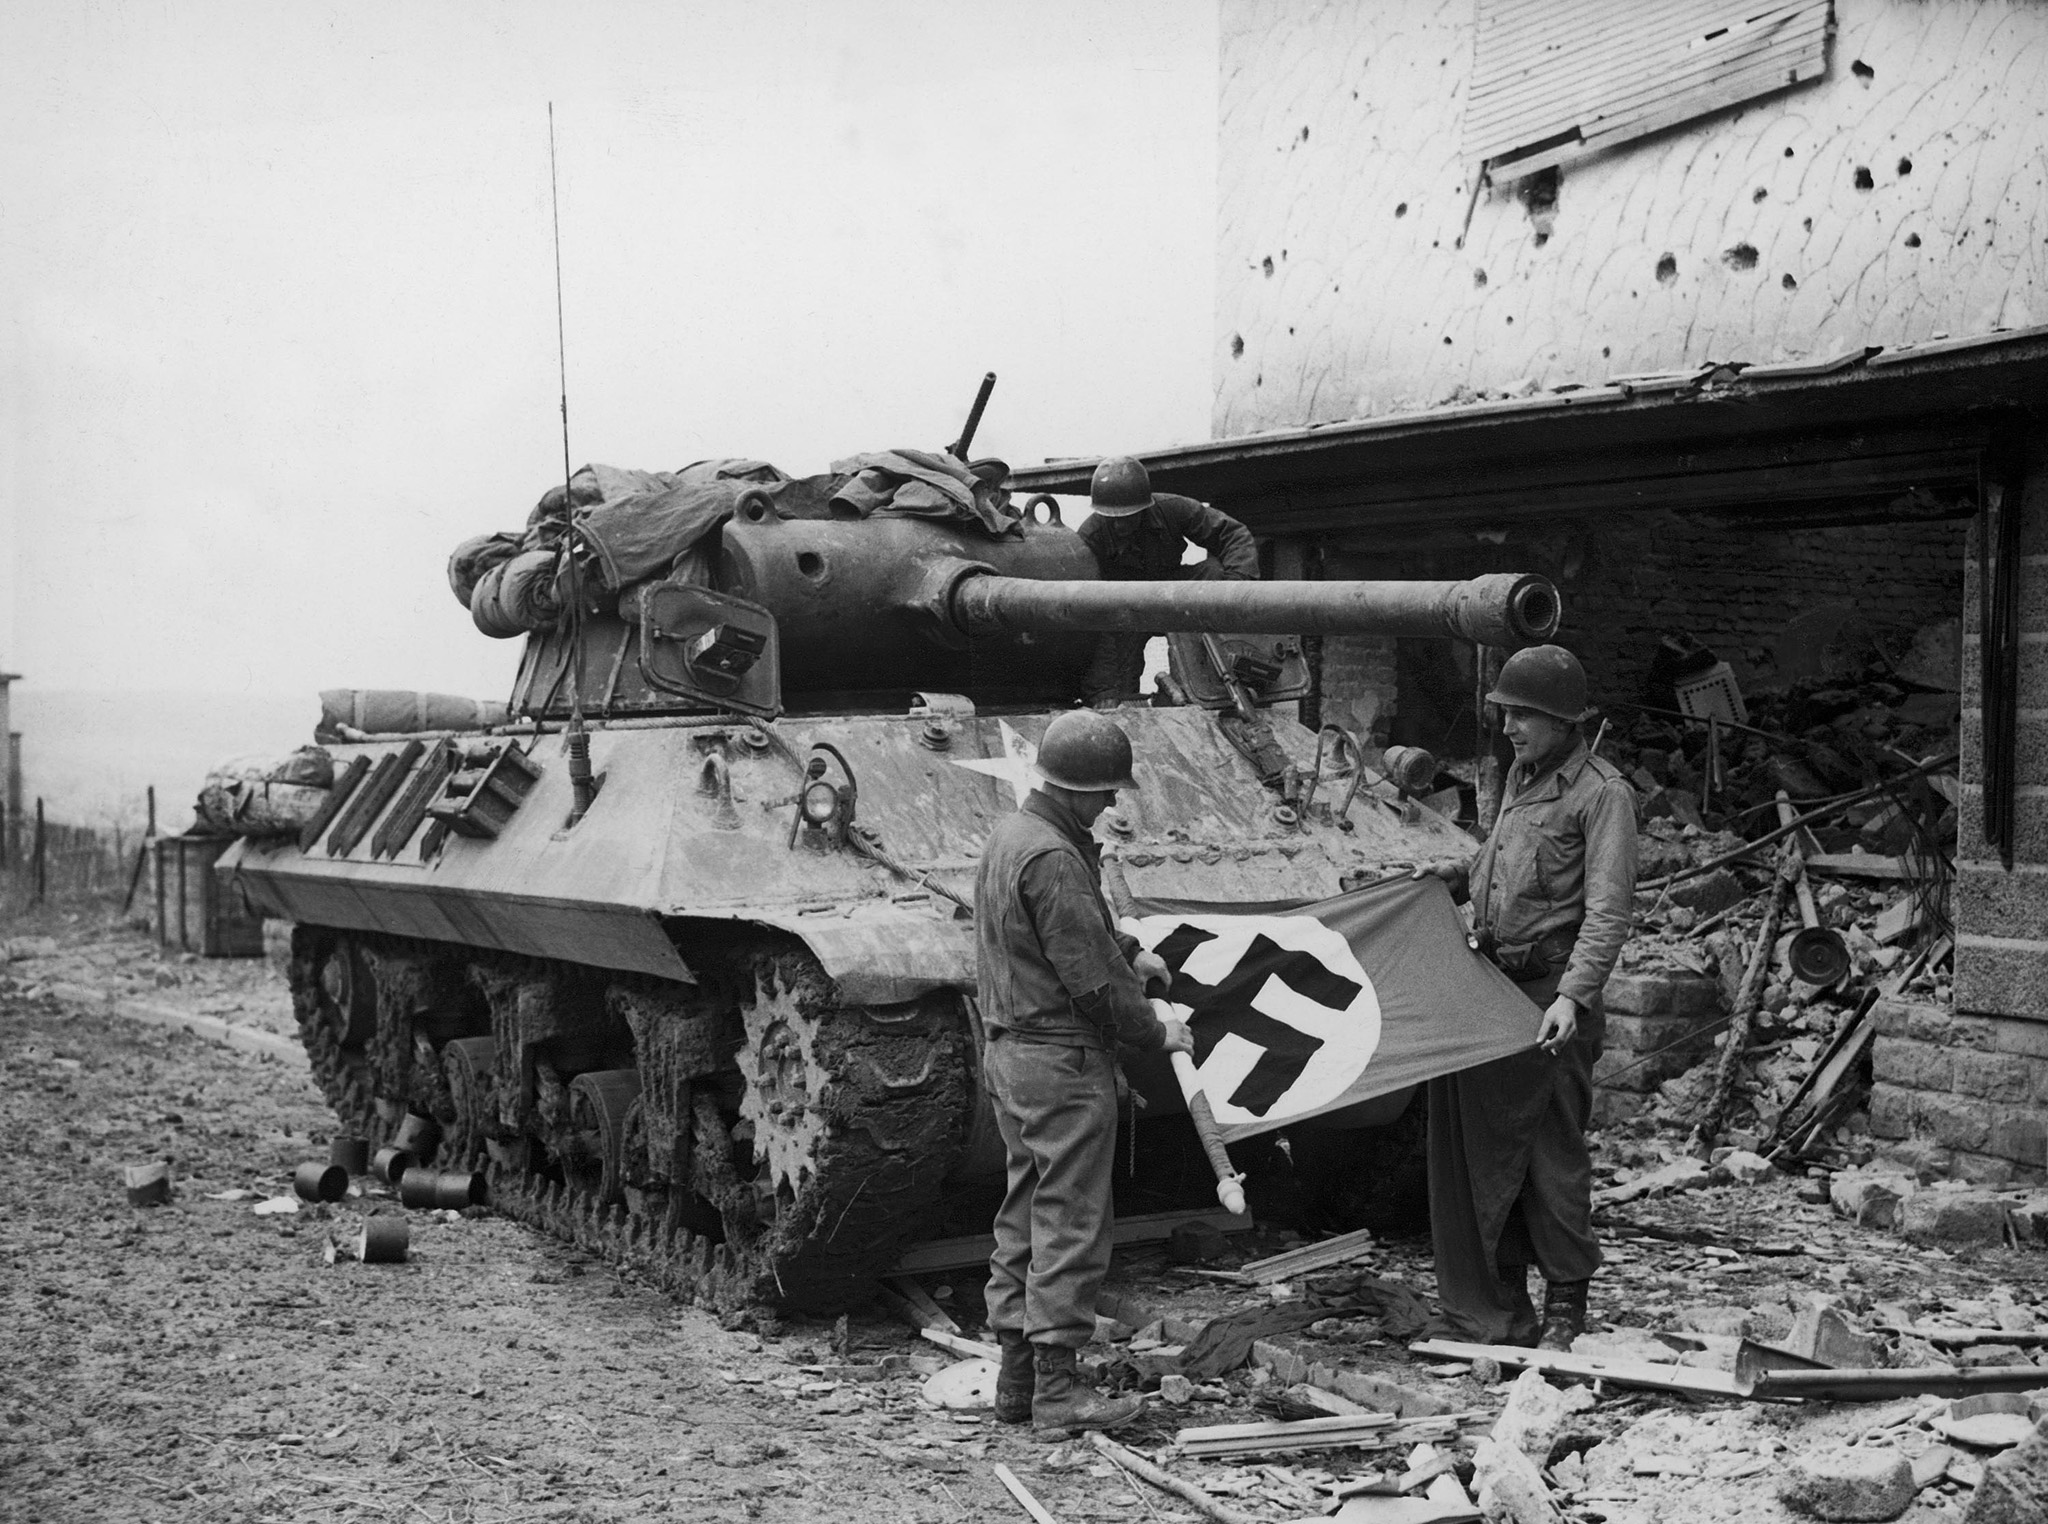 the tank killers: a history of america